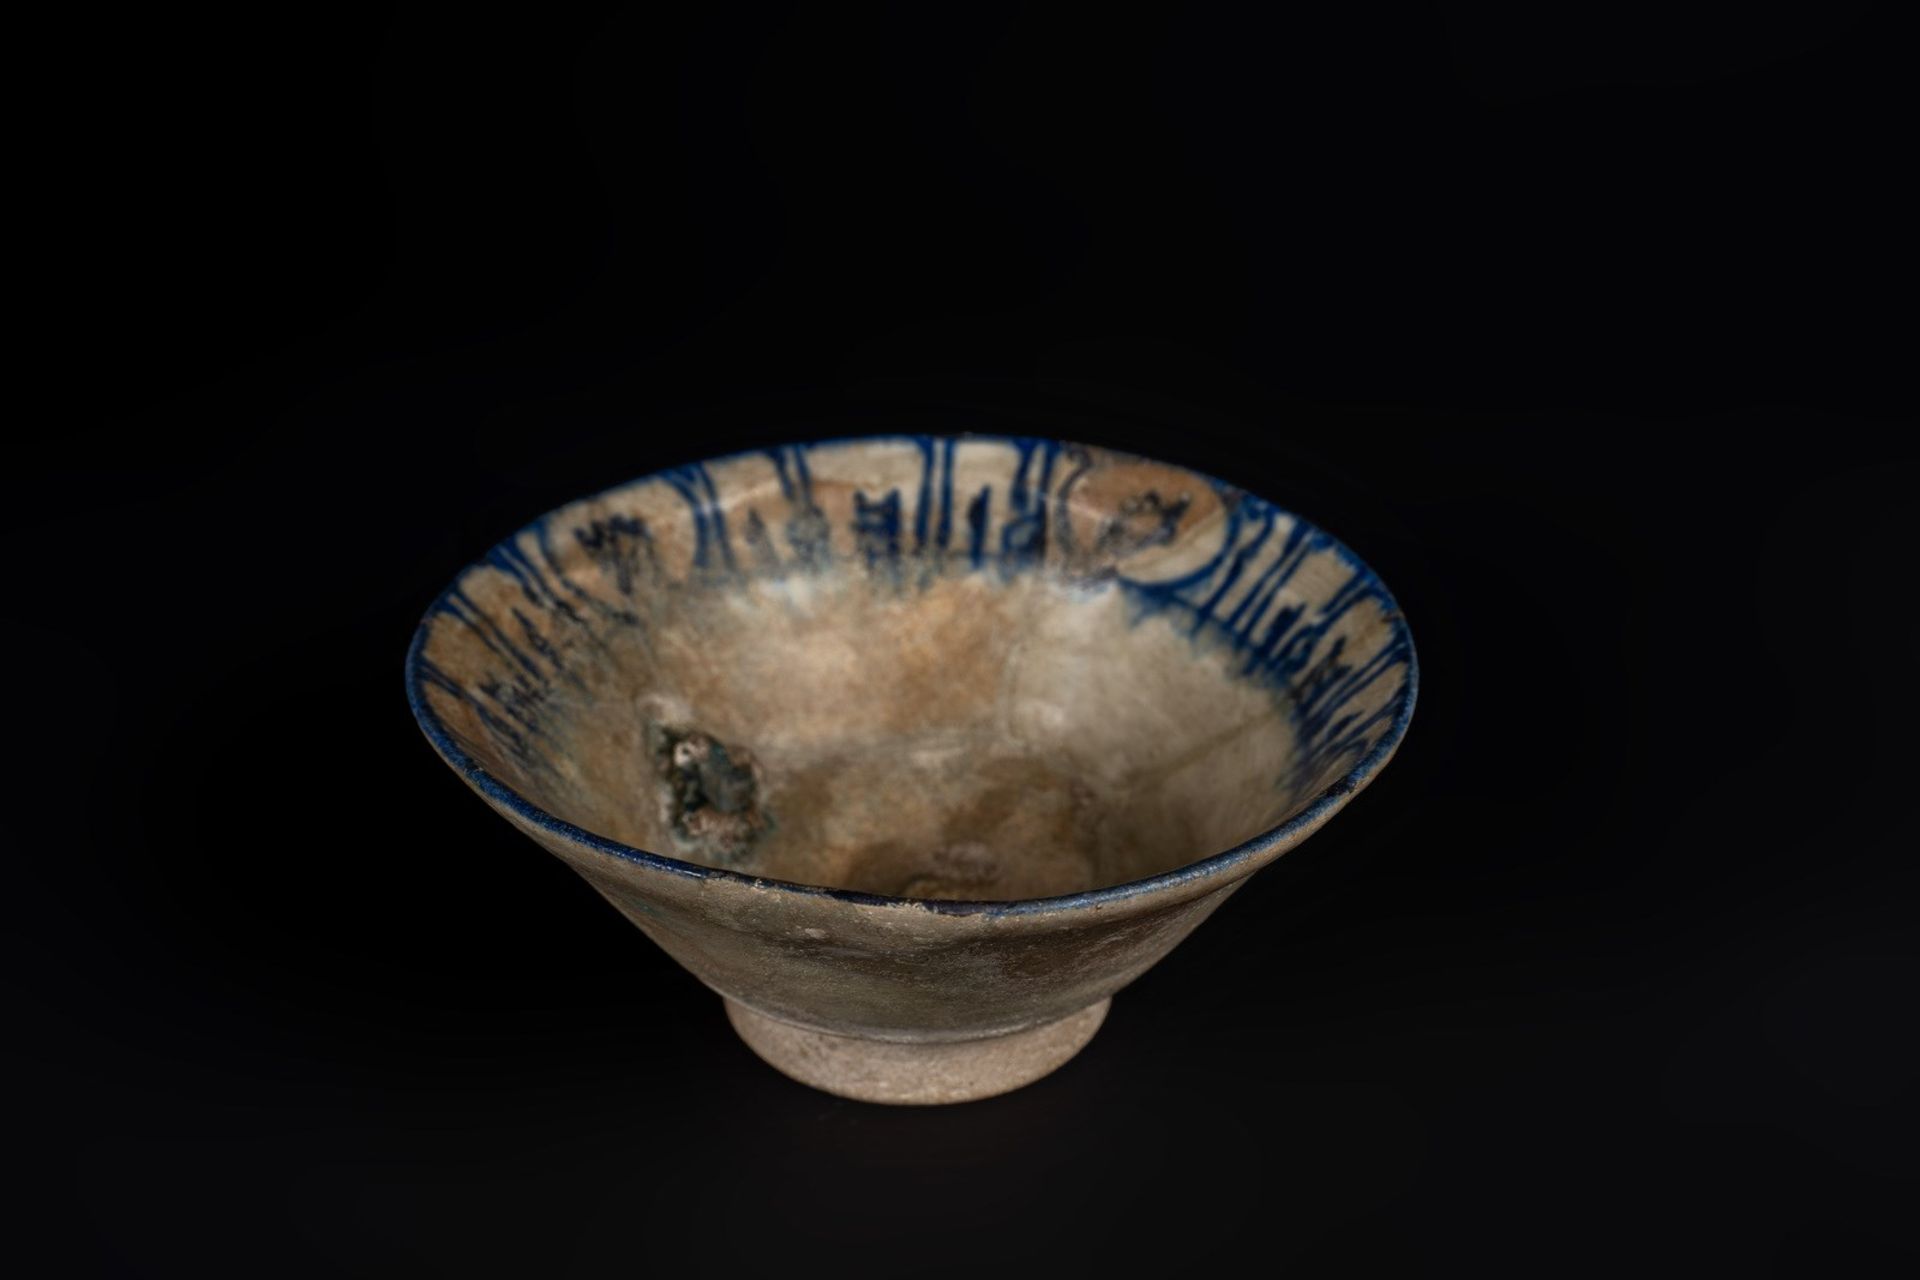 Arte Islamica A pottery bowl with blue pseudo calligraphy along the edgeIran, Kashan, 12th-13th cen